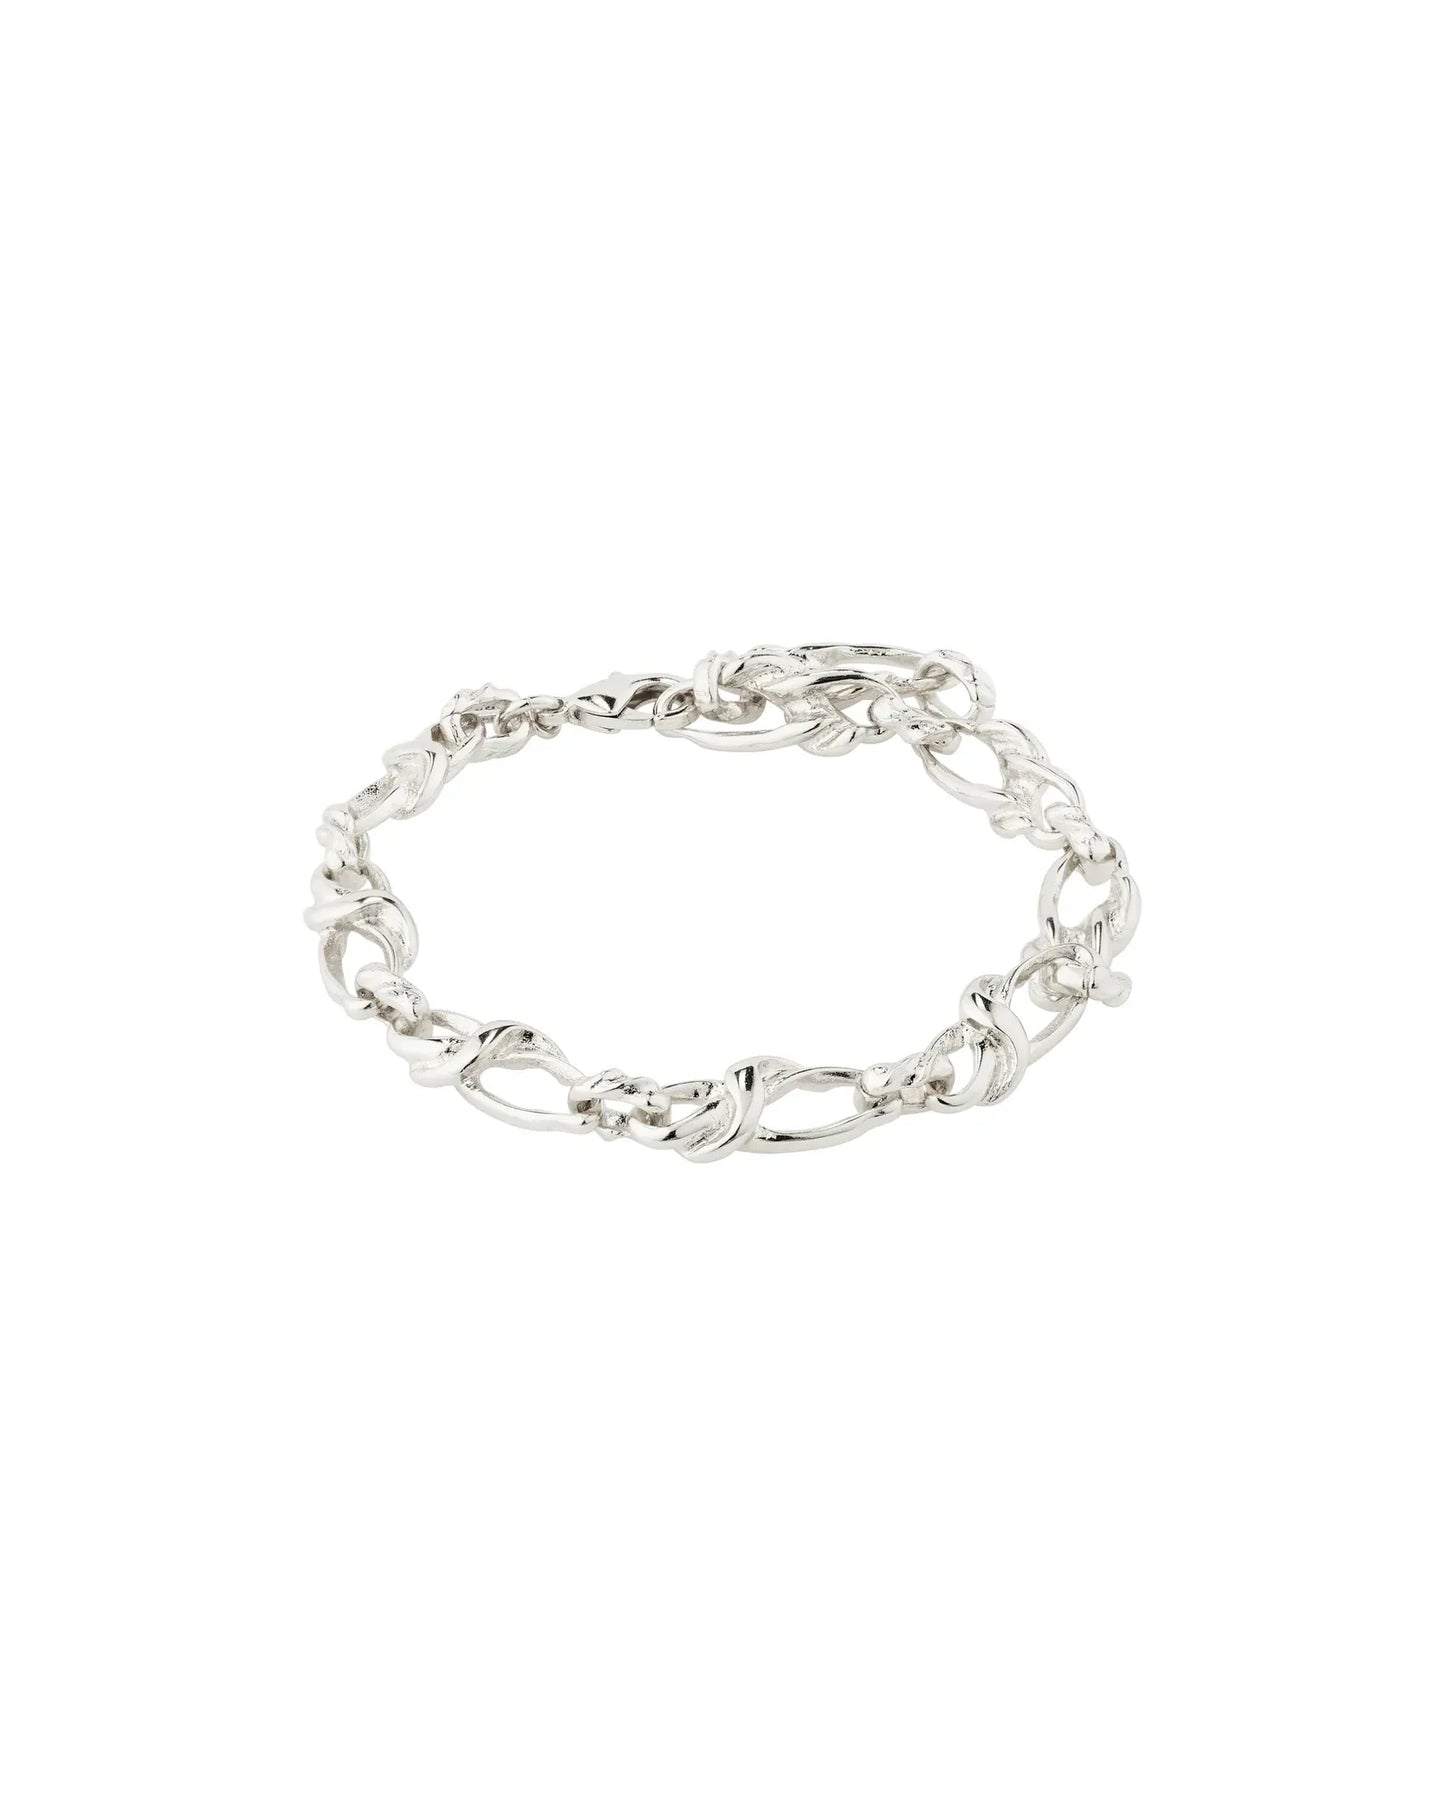 RANI Recycled Bracelet - Silver Plated